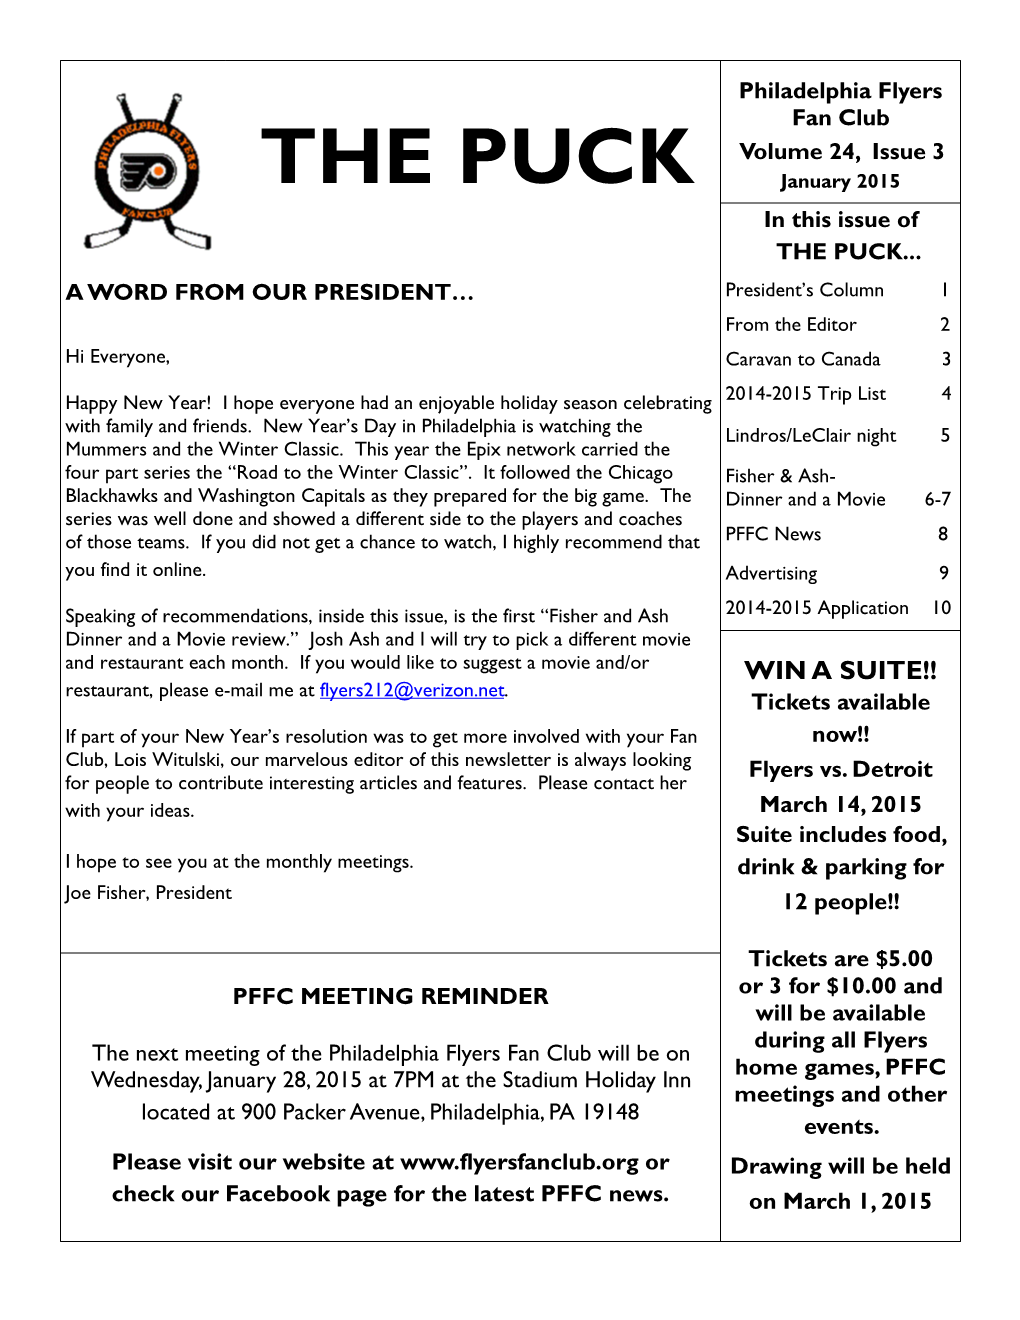 THE PUCK January 2015 in This Issue of the PUCK